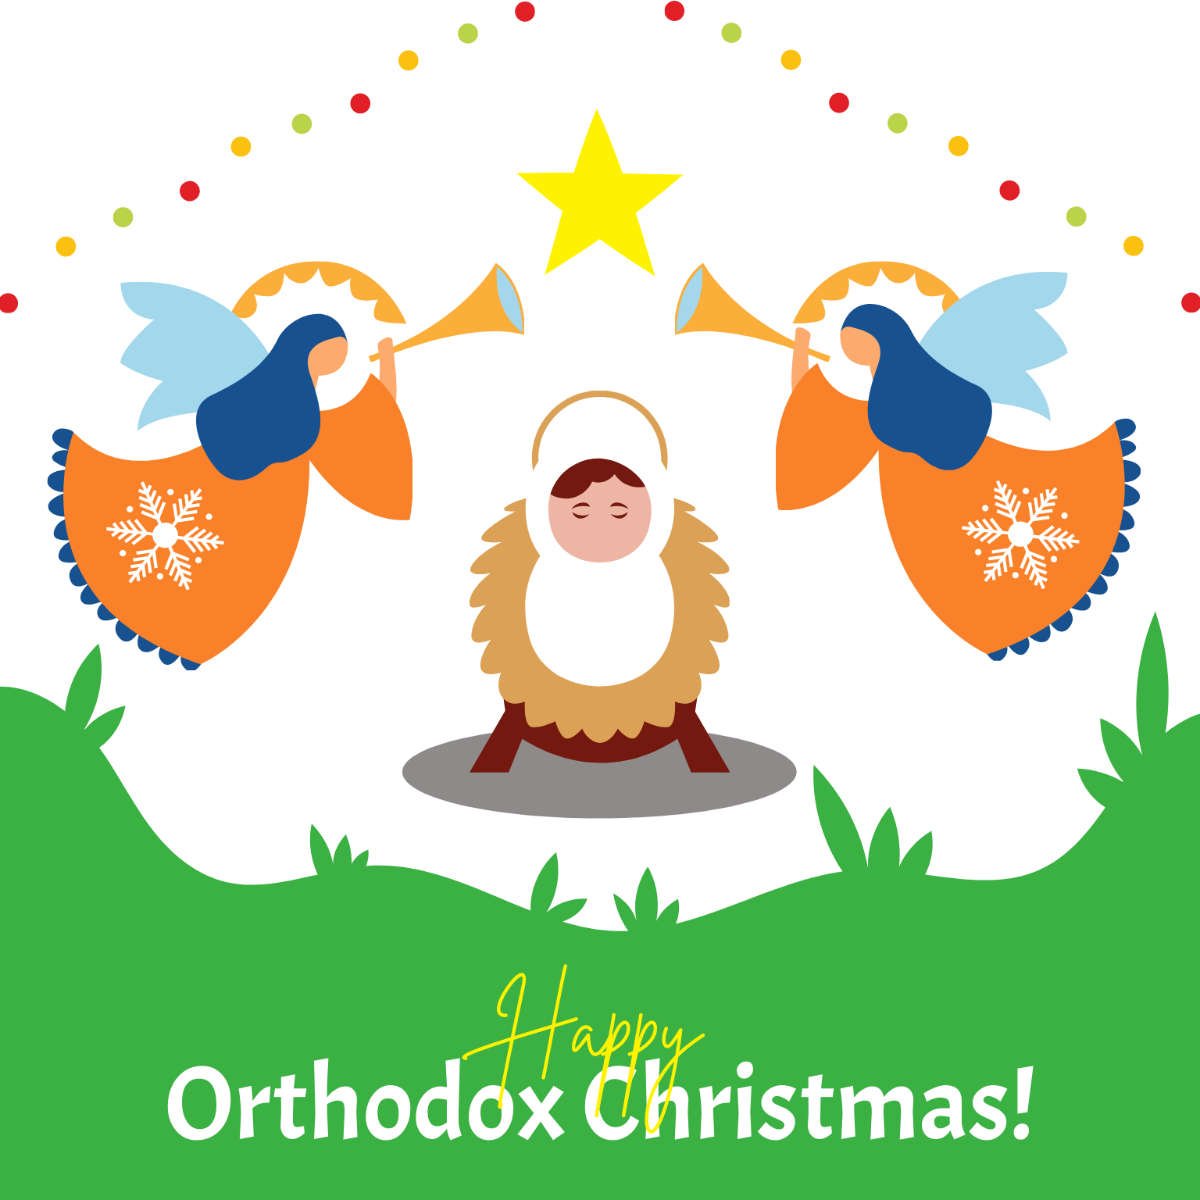 Free Happy Orthodox Christmas Vector Template